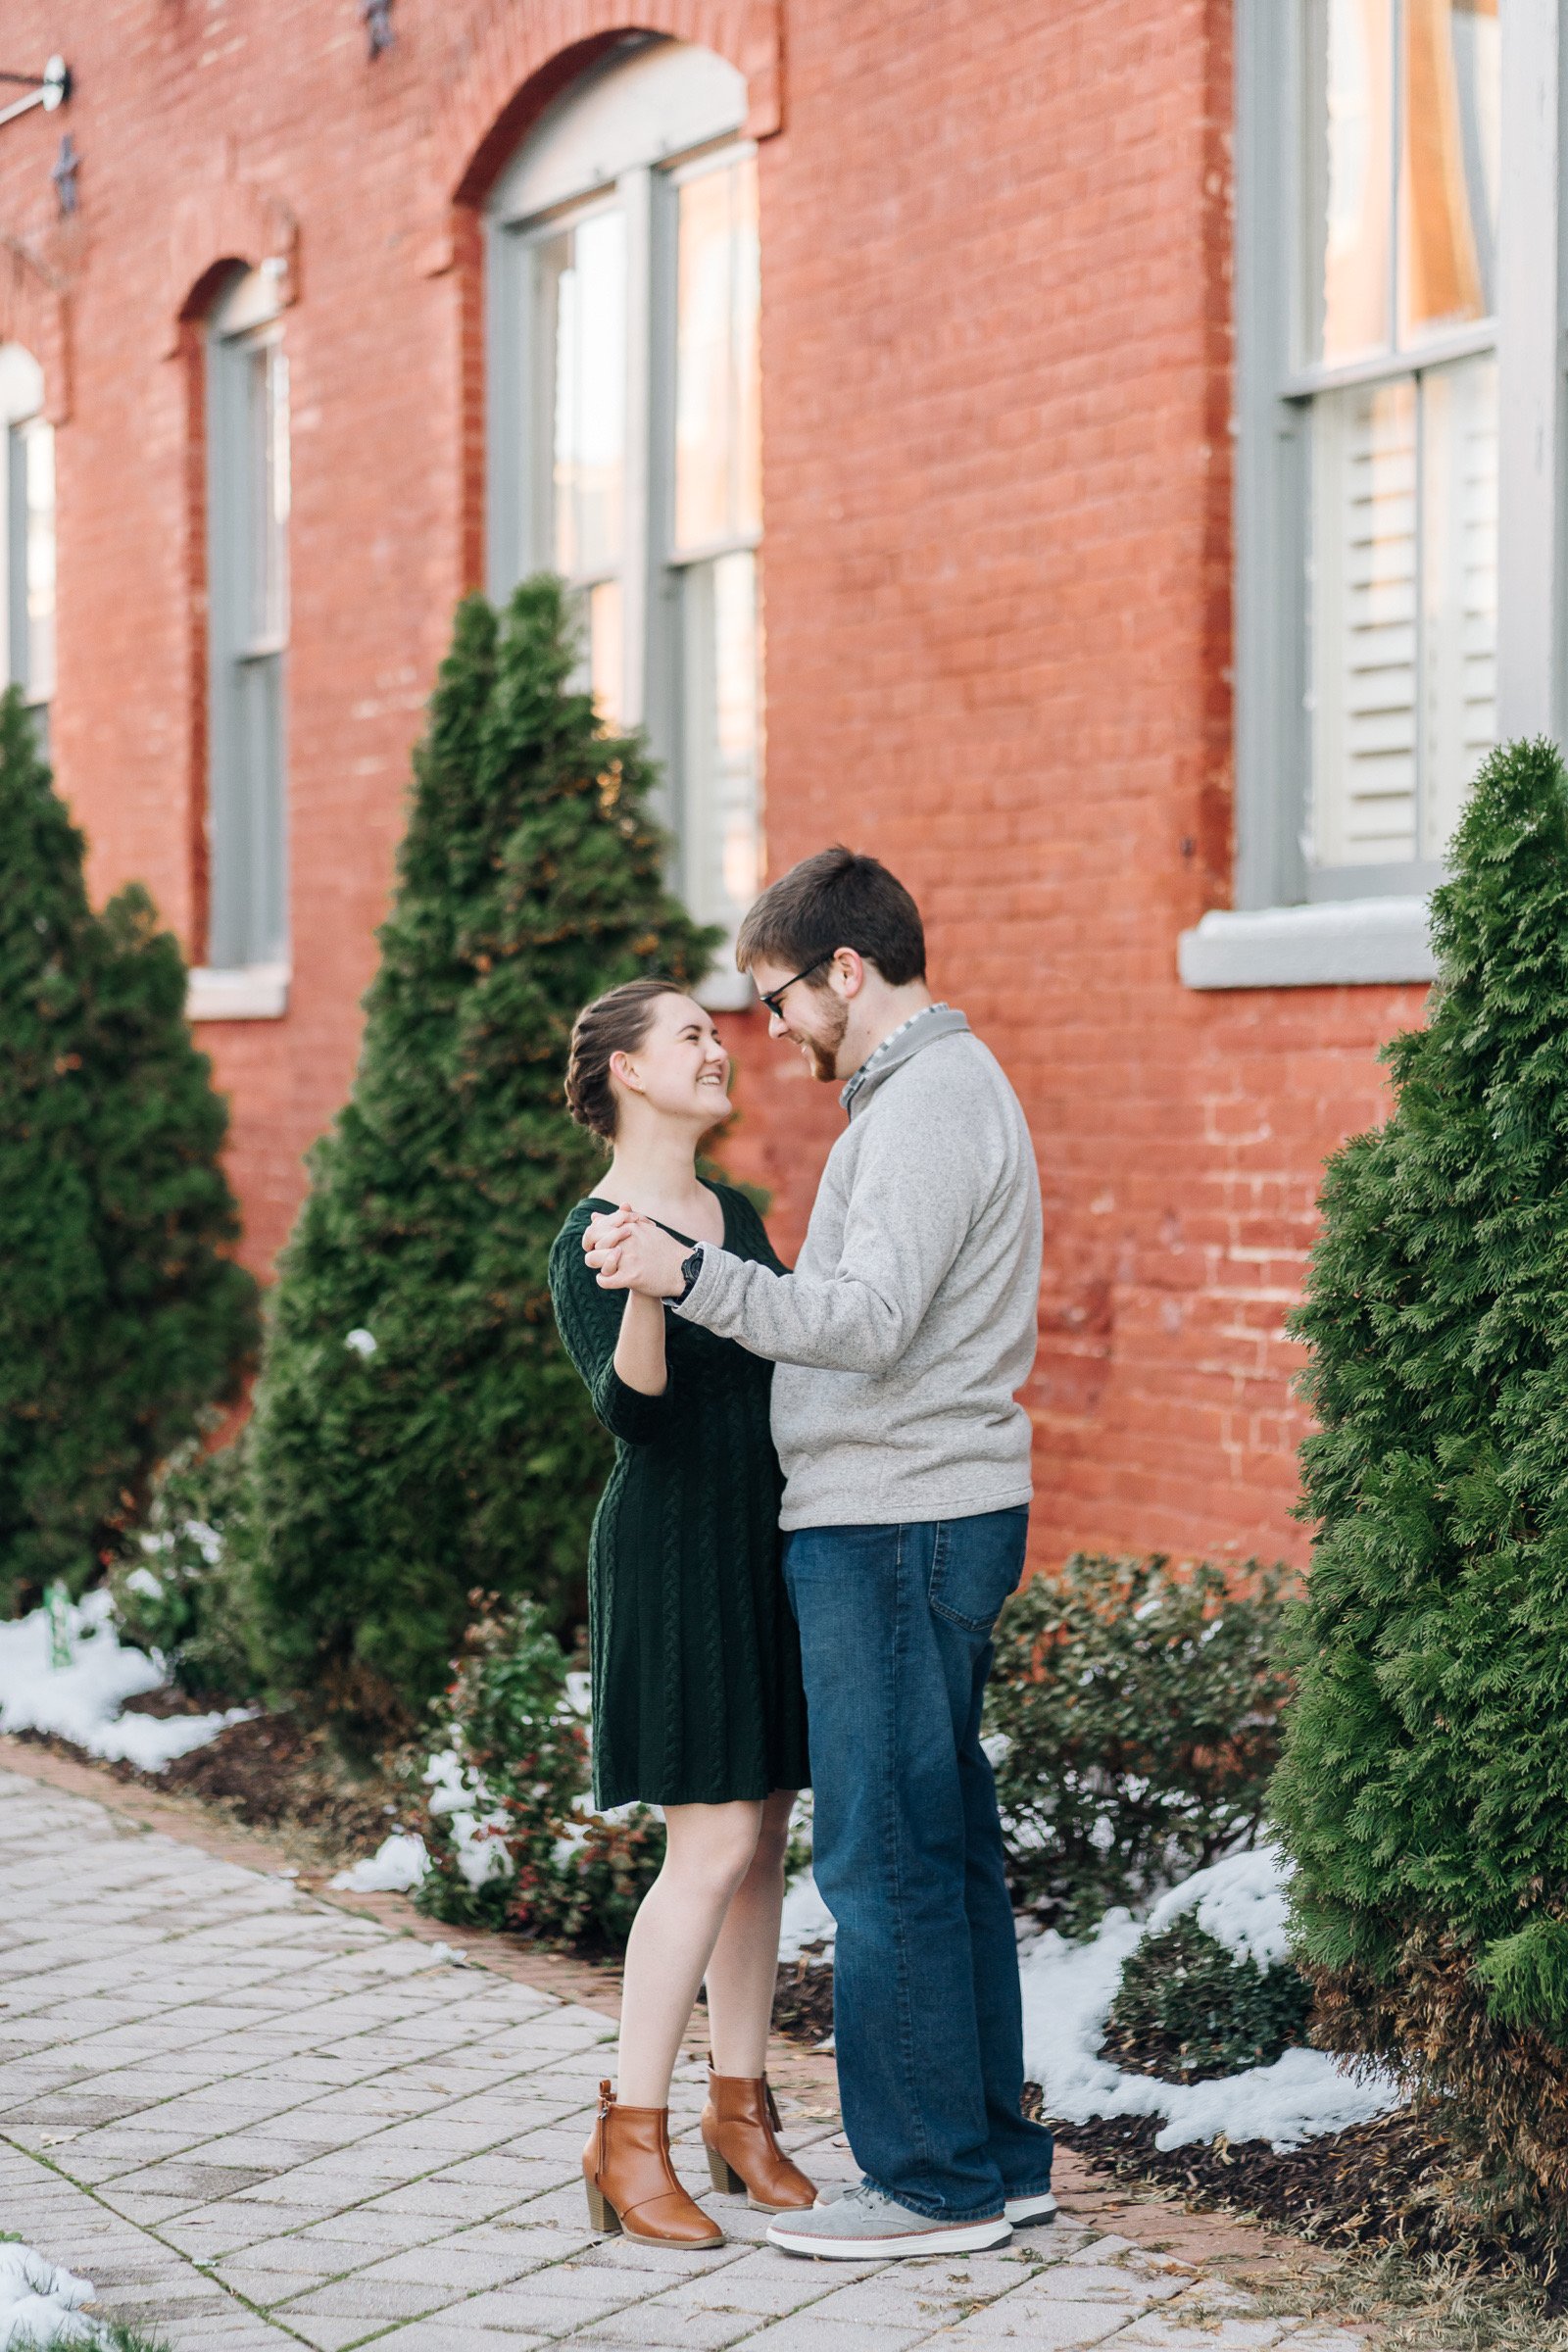 jameson-anna-engagement-session-downtown-danville-river-district-virginia-by-jonathan-hannah-photography-18.jpg